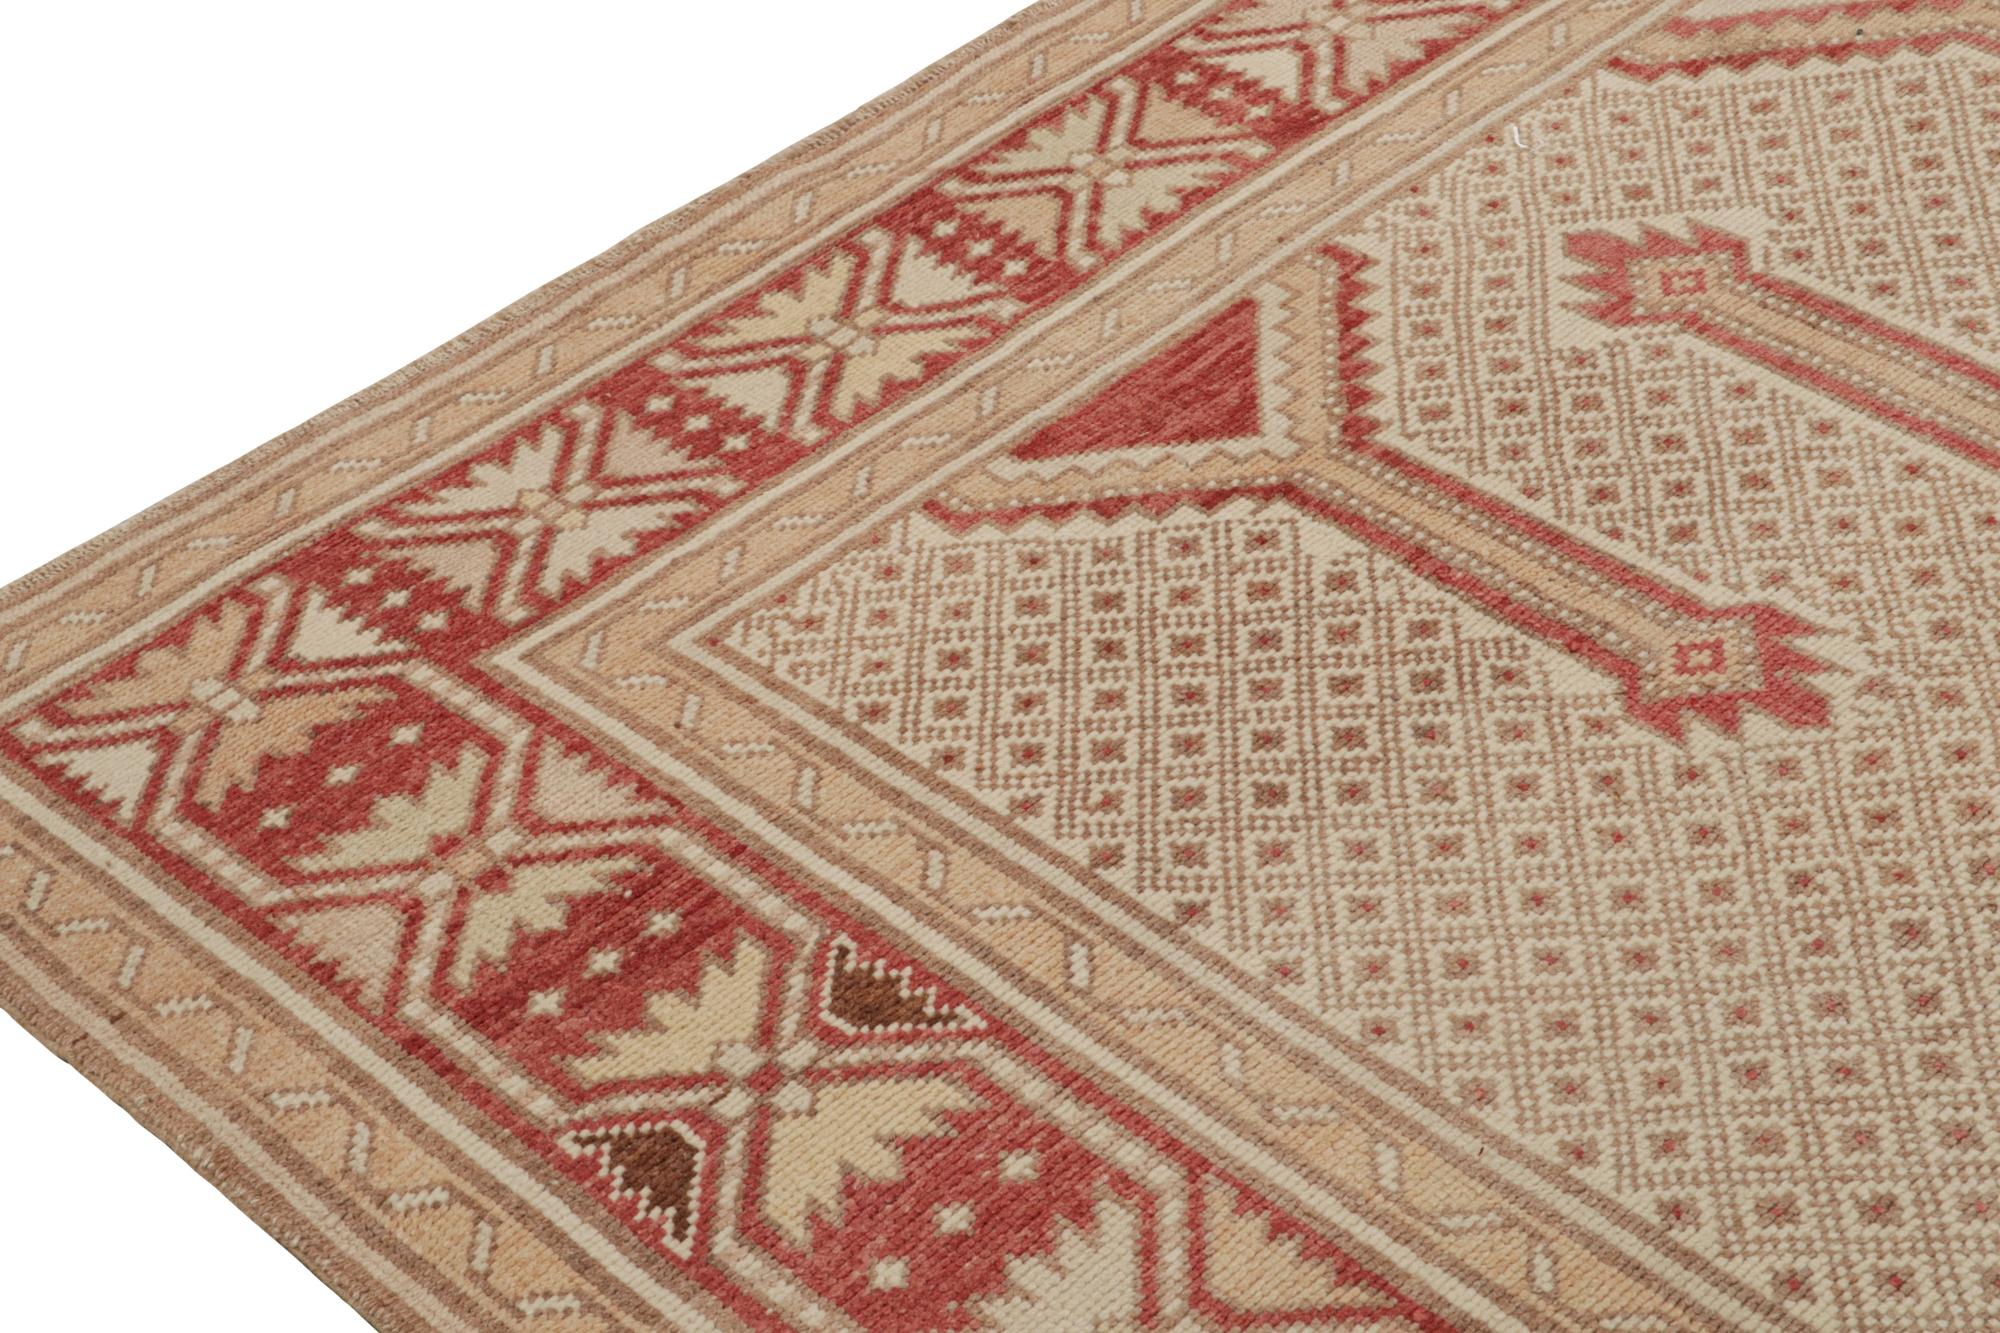 Hand-Knotted Vintage Persian Rug in Beige-Brown and Red Geometric Patterns For Sale